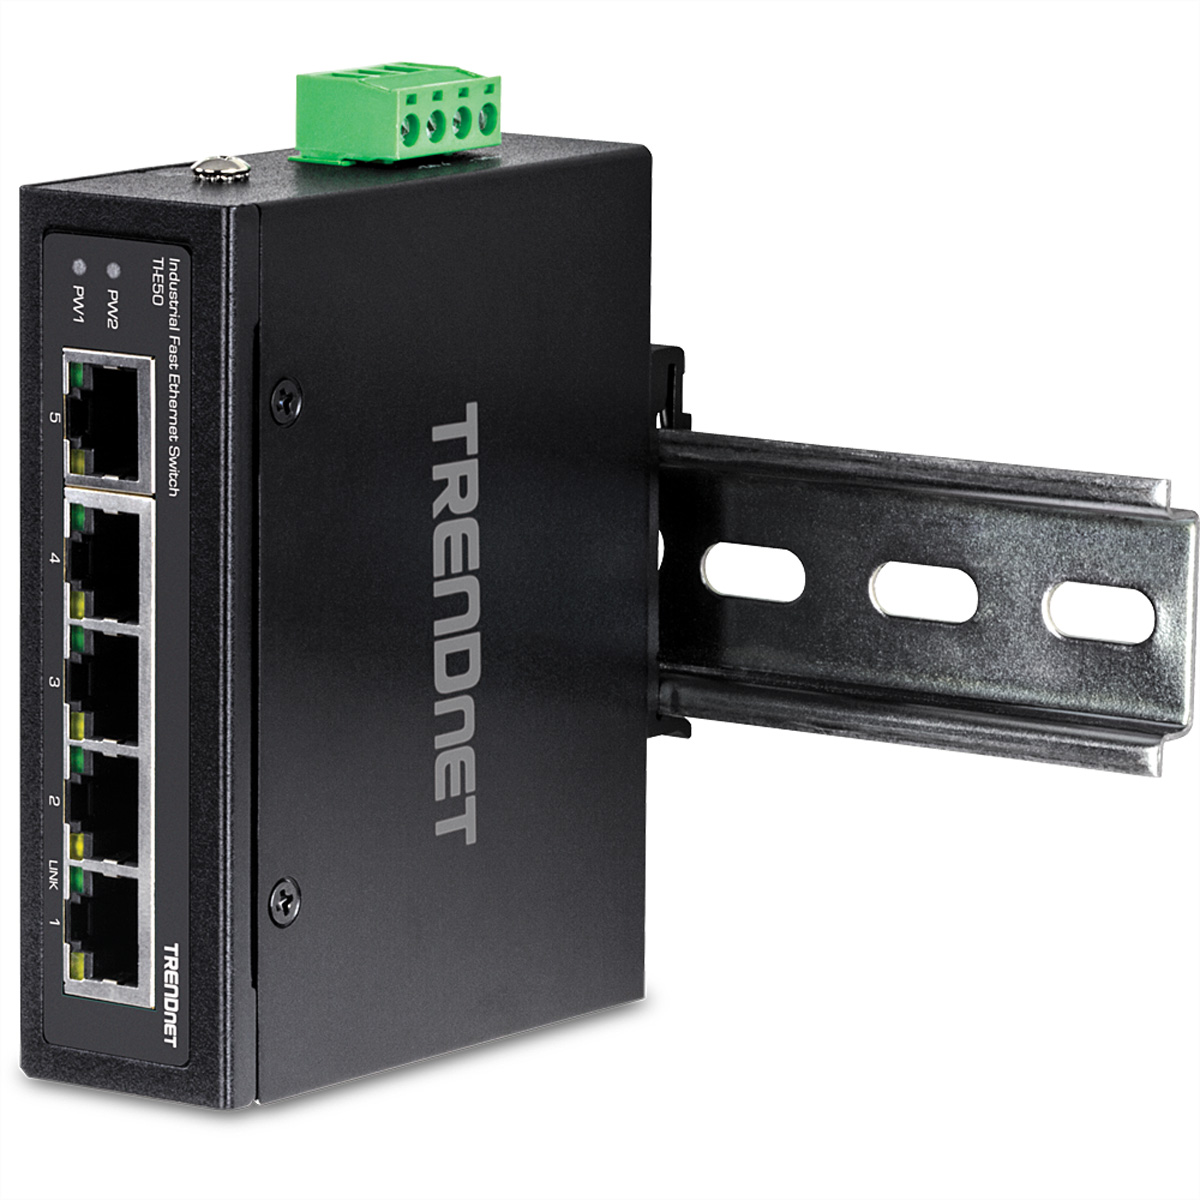 TRENDNET TI-E50 Industrial Ethernet Industrial DIN-Rail 5-Port Fast Switch Networking